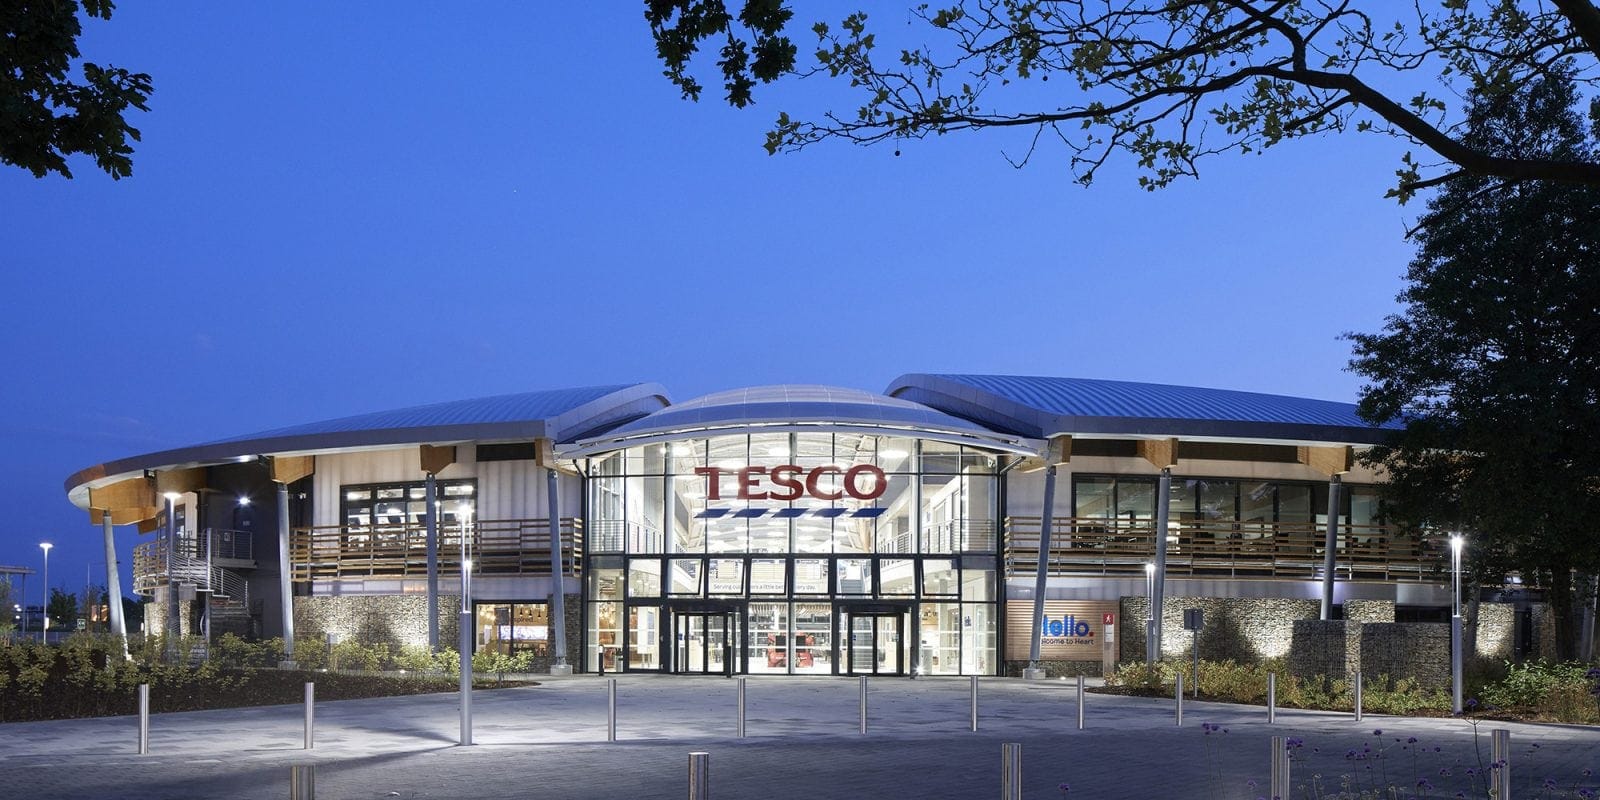 The Heart Building for Tesco by LOM architecture and design